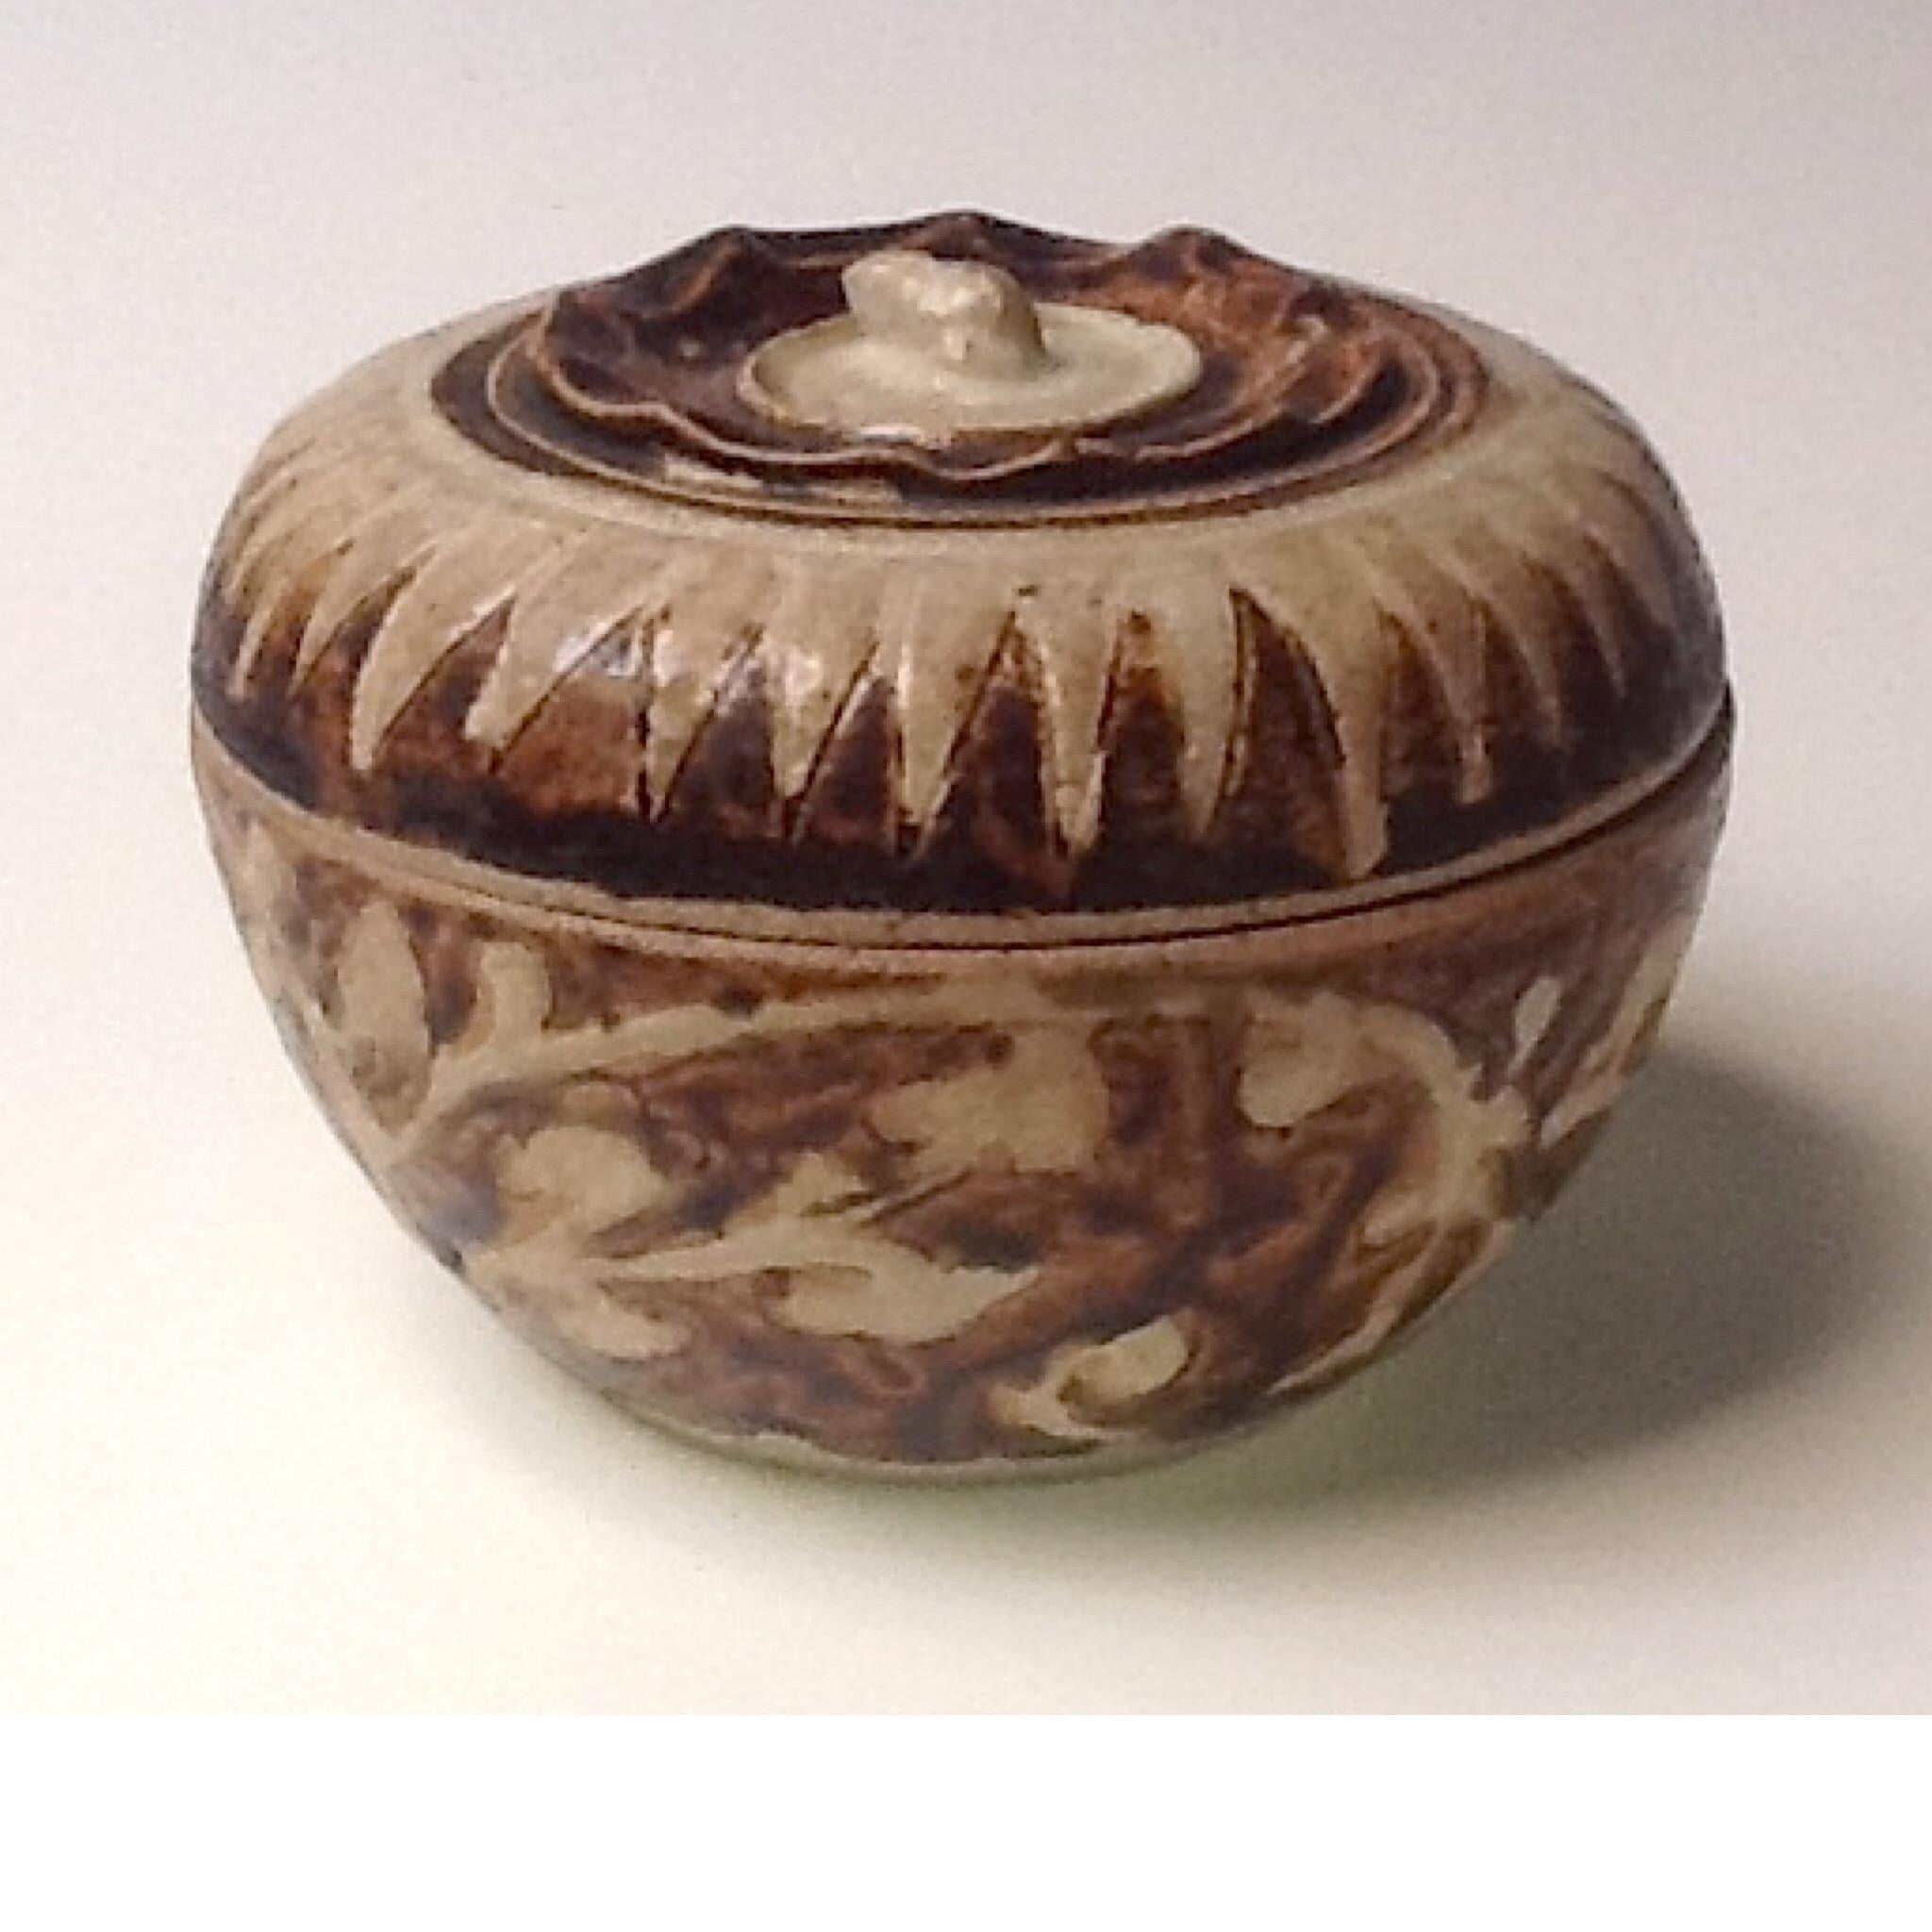 Thai ceramic covered box from the Sawankhalok kilns of globular fruit form with pinched foliate rim and sepal stem finial on top decorated in brown and white glaze in a peaked zigzag design at the the shoulder and foliate scroll pattern on the body,